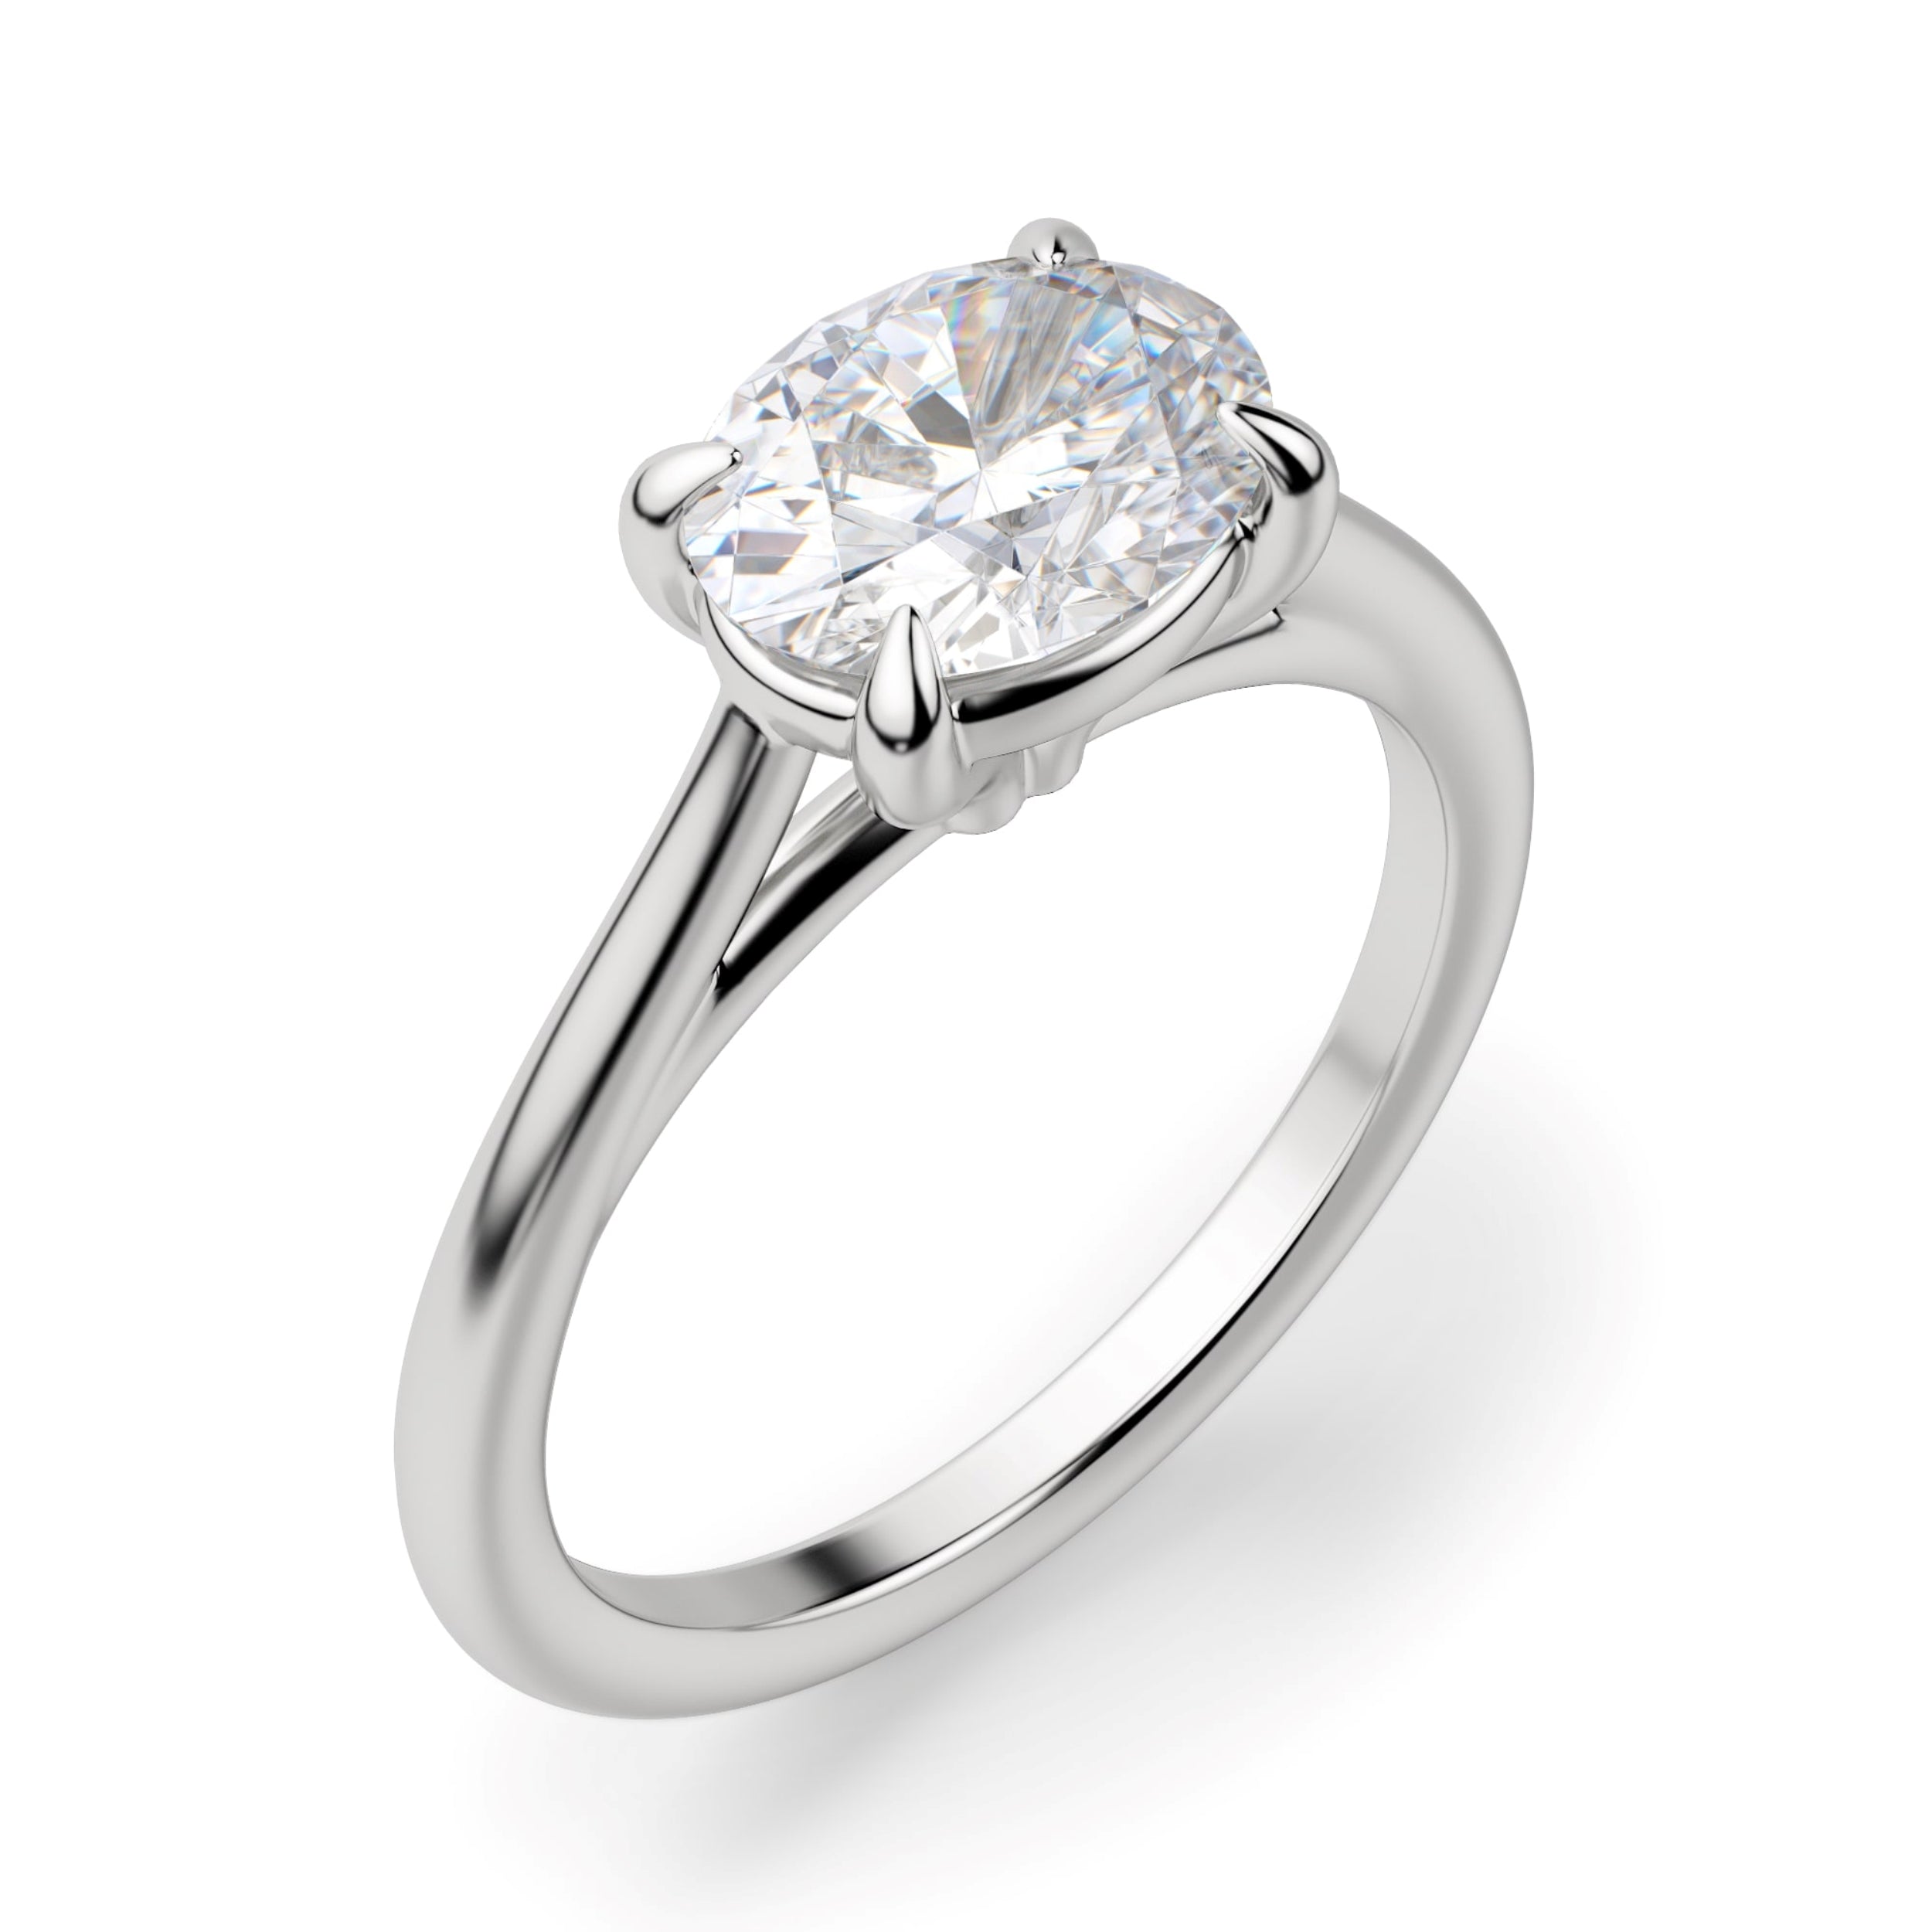 Oval Cut Solitaire Rings For Women